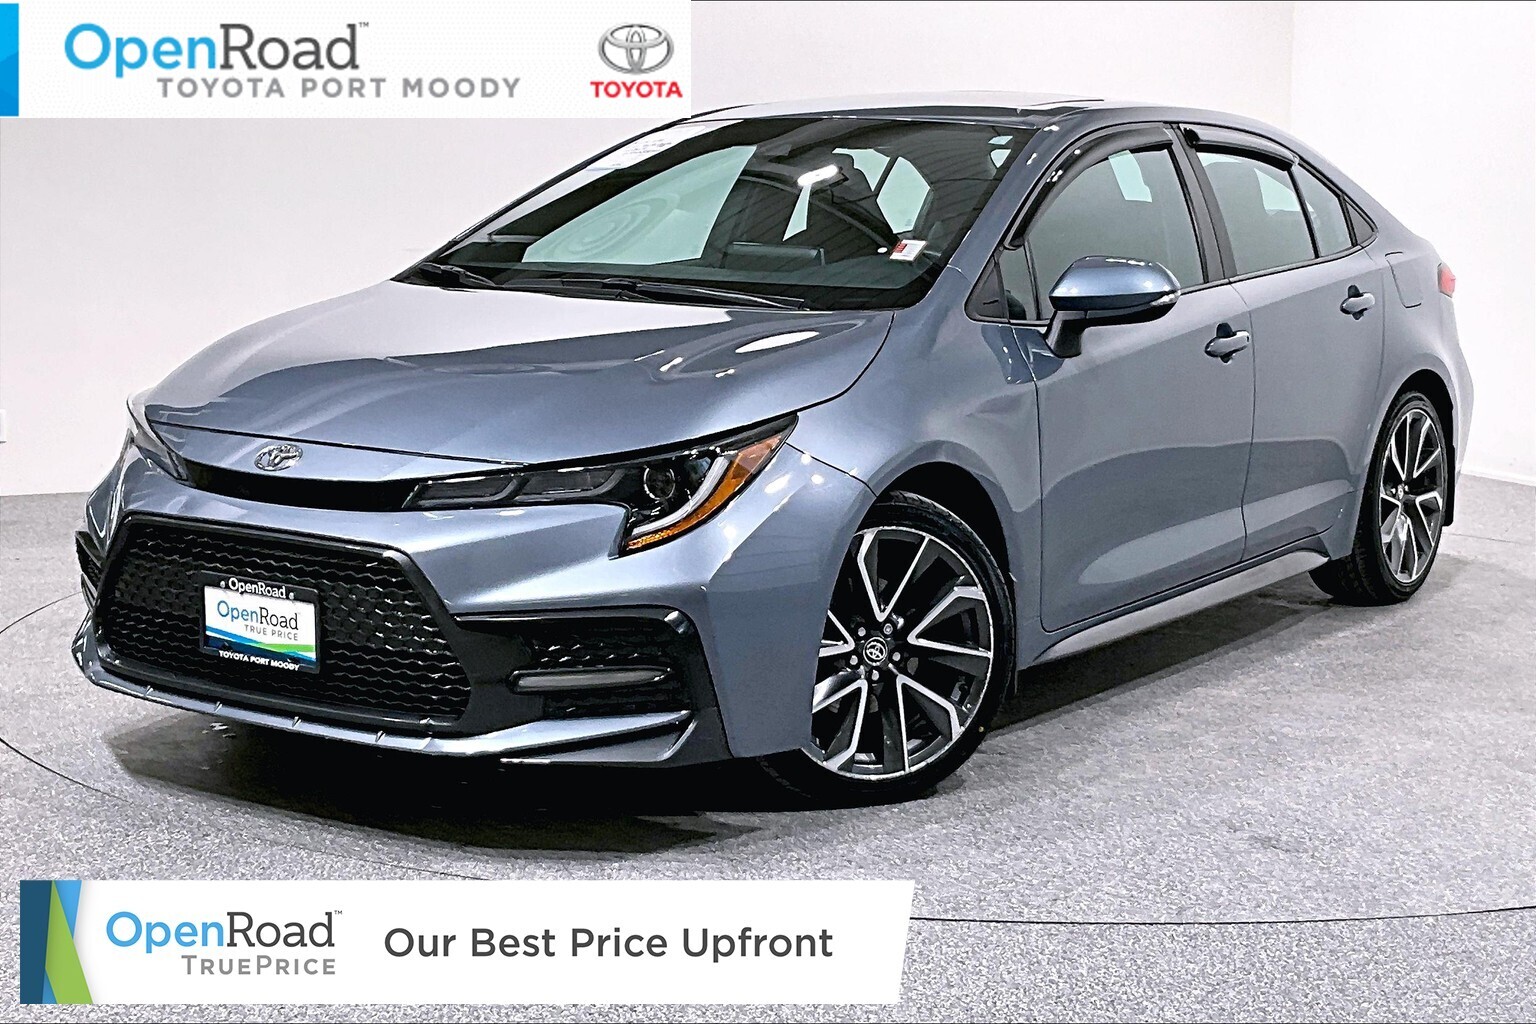 2021 Toyota Corolla SE CVT |OpenRoad True Price |Local |One Owner |Ser